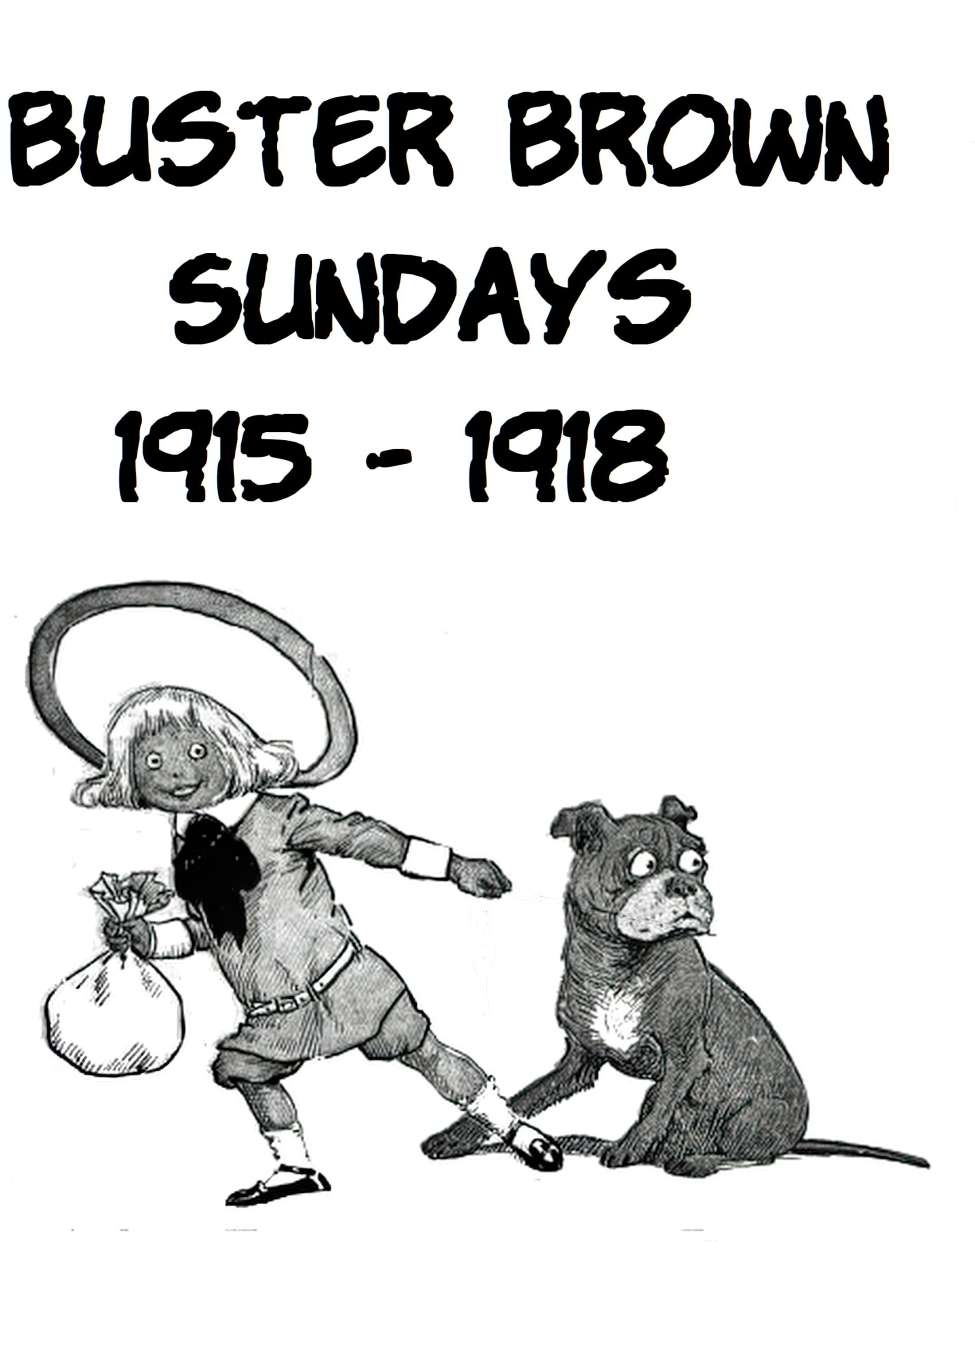 Book Cover For Buster Brown Sundays 1915 - 1918